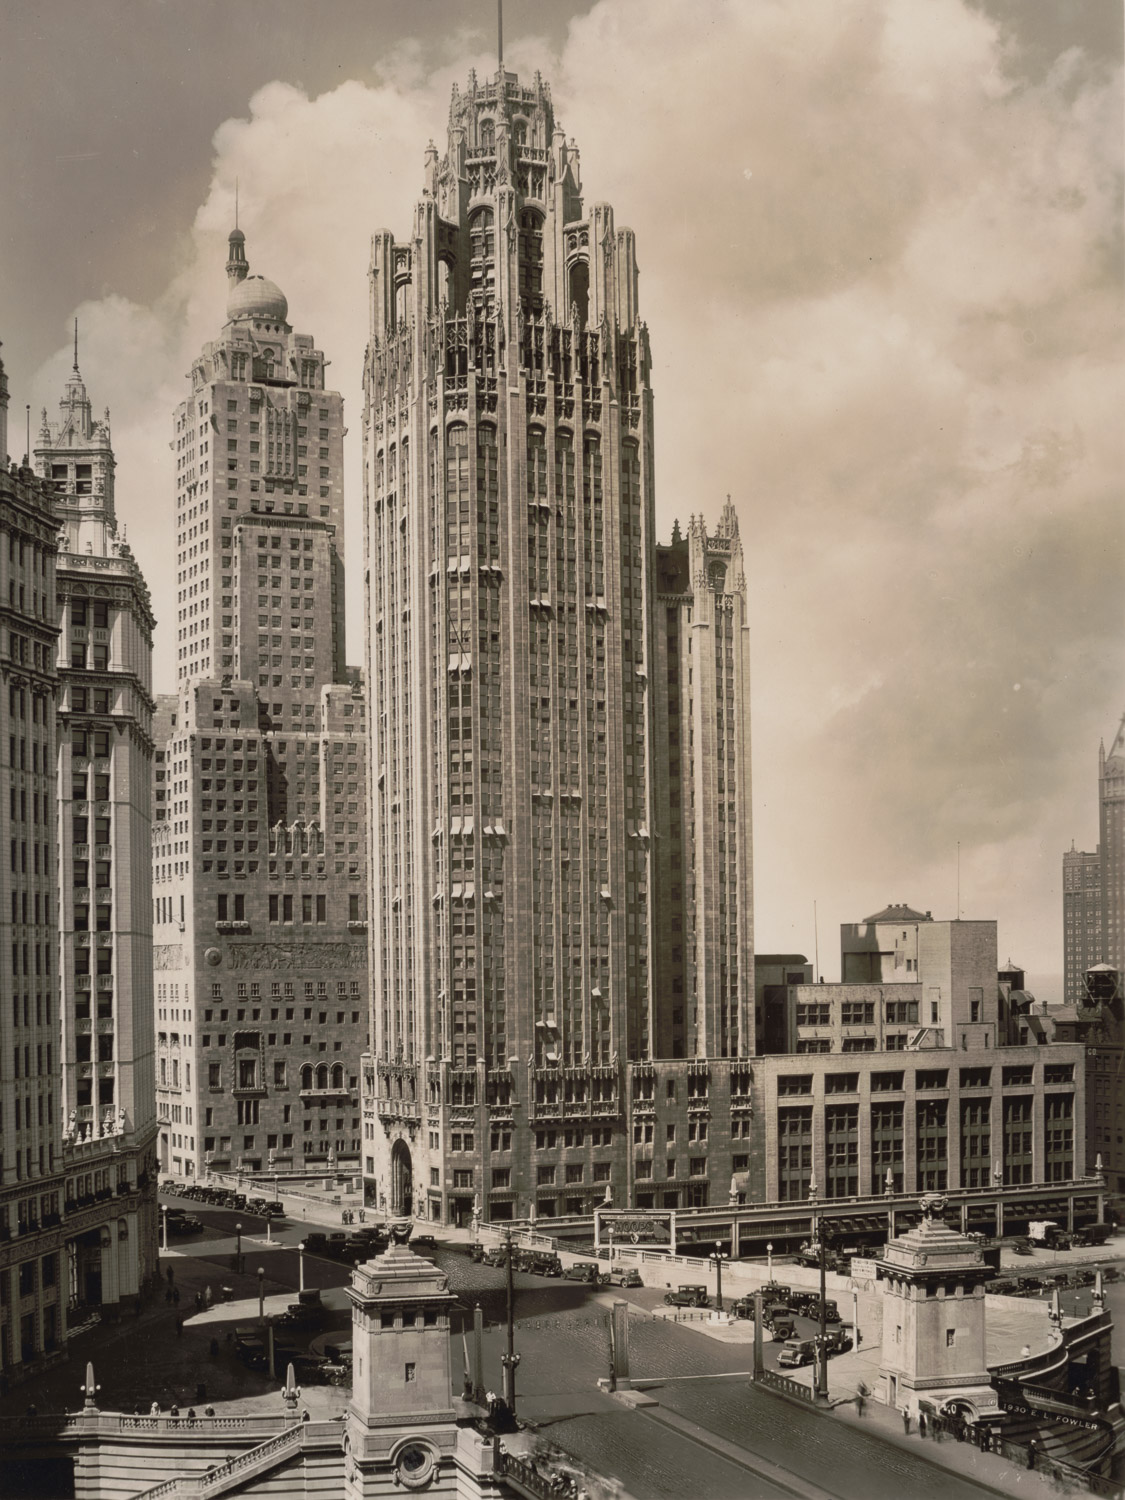 A black and white photograph of the tower as it appeared in the 1930s. Old-fashioned cars line the road that the entrance of the skyscraper is on. A bank of the Chicago River is barely visible in the lower right corner, peeking out from under a bridge. The majority of the skyscraper is the unornamented central shaft with beveled or angled corners; the base is made up of four stories topped by gothic-style balconies. The uppermost portion of the tower consists of eight flying buttresses that support a small, octagonal top portion which all together looks like a crown.